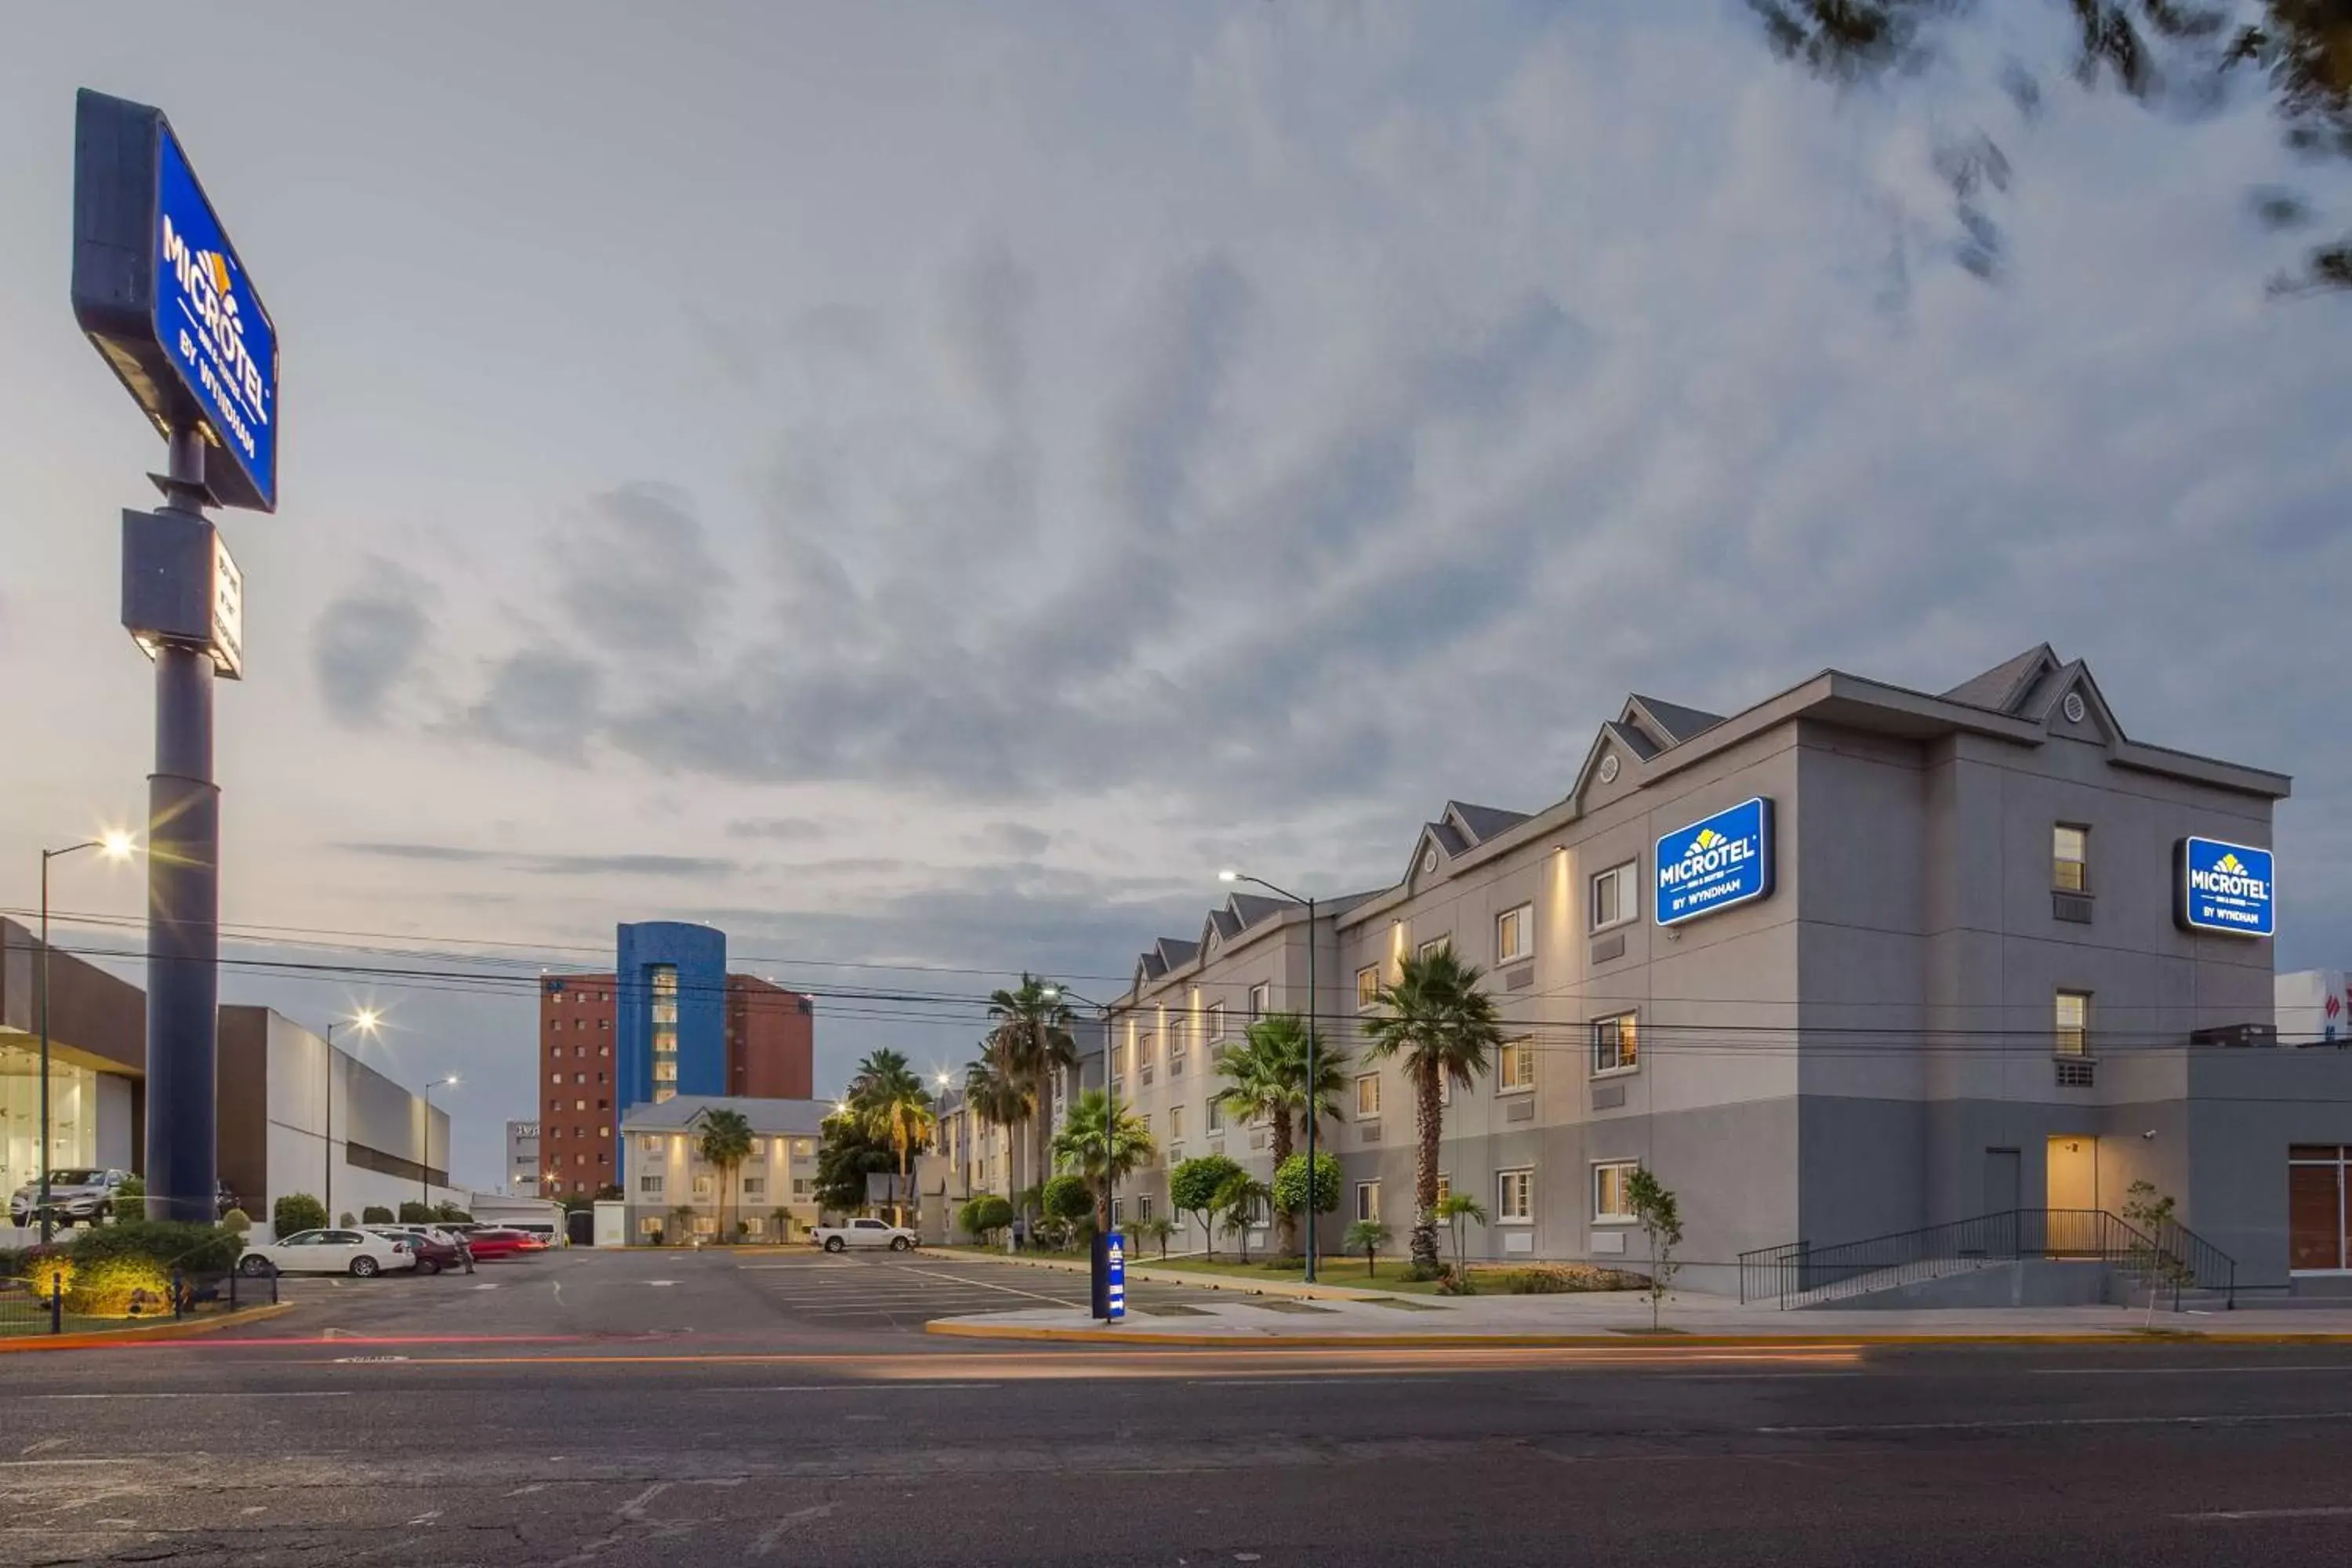 Property building in Microtel Inn & Suites by Wyndham Culiacán